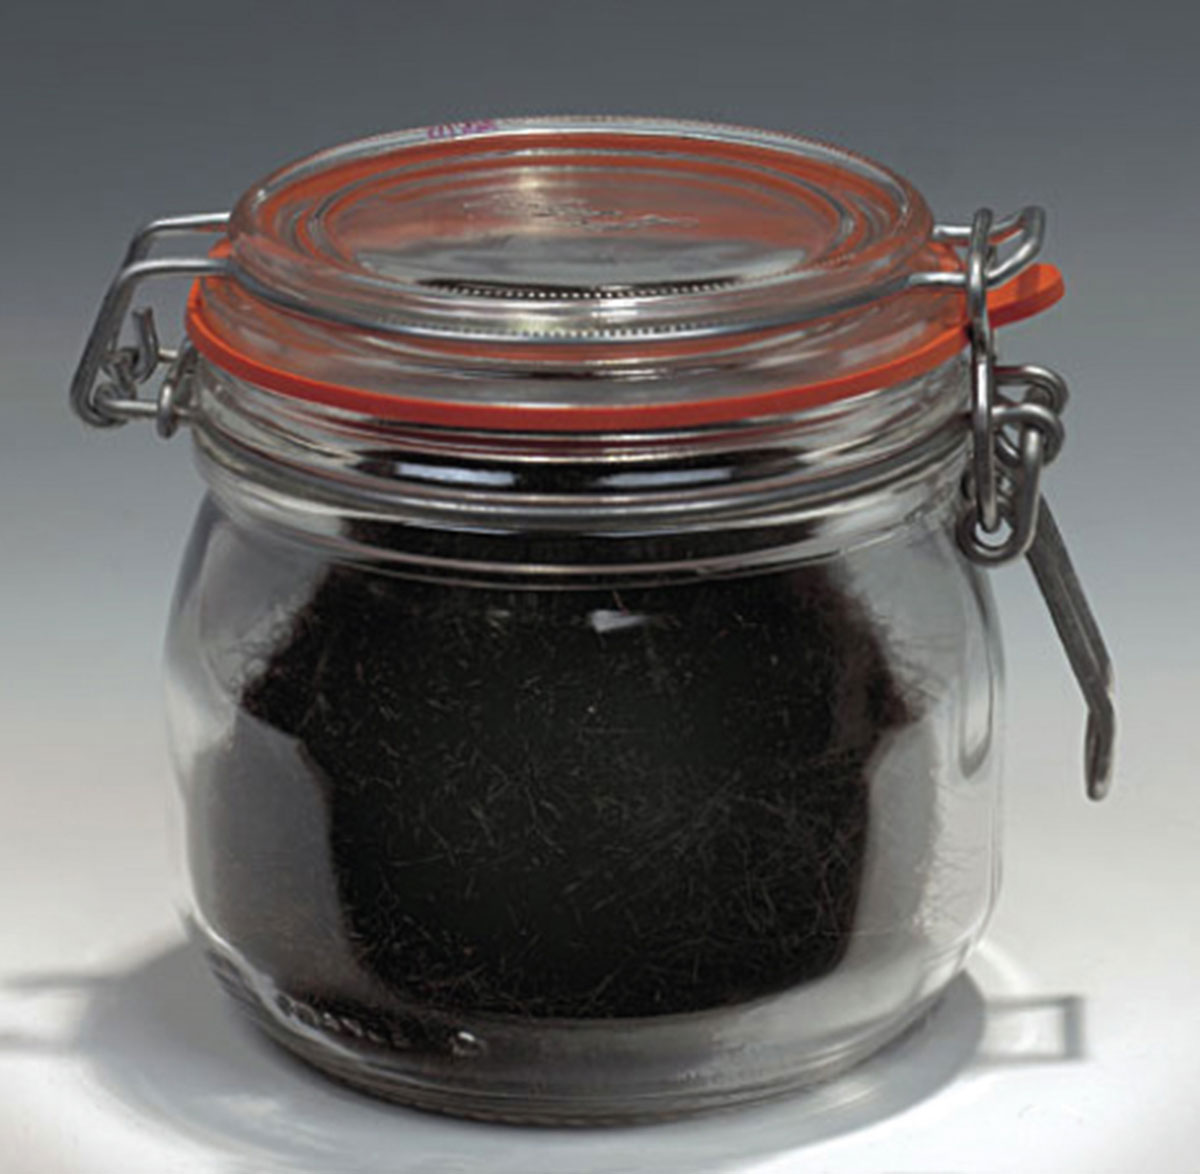 A photograph of a jar containing locks of Elvis’s hair for auction.